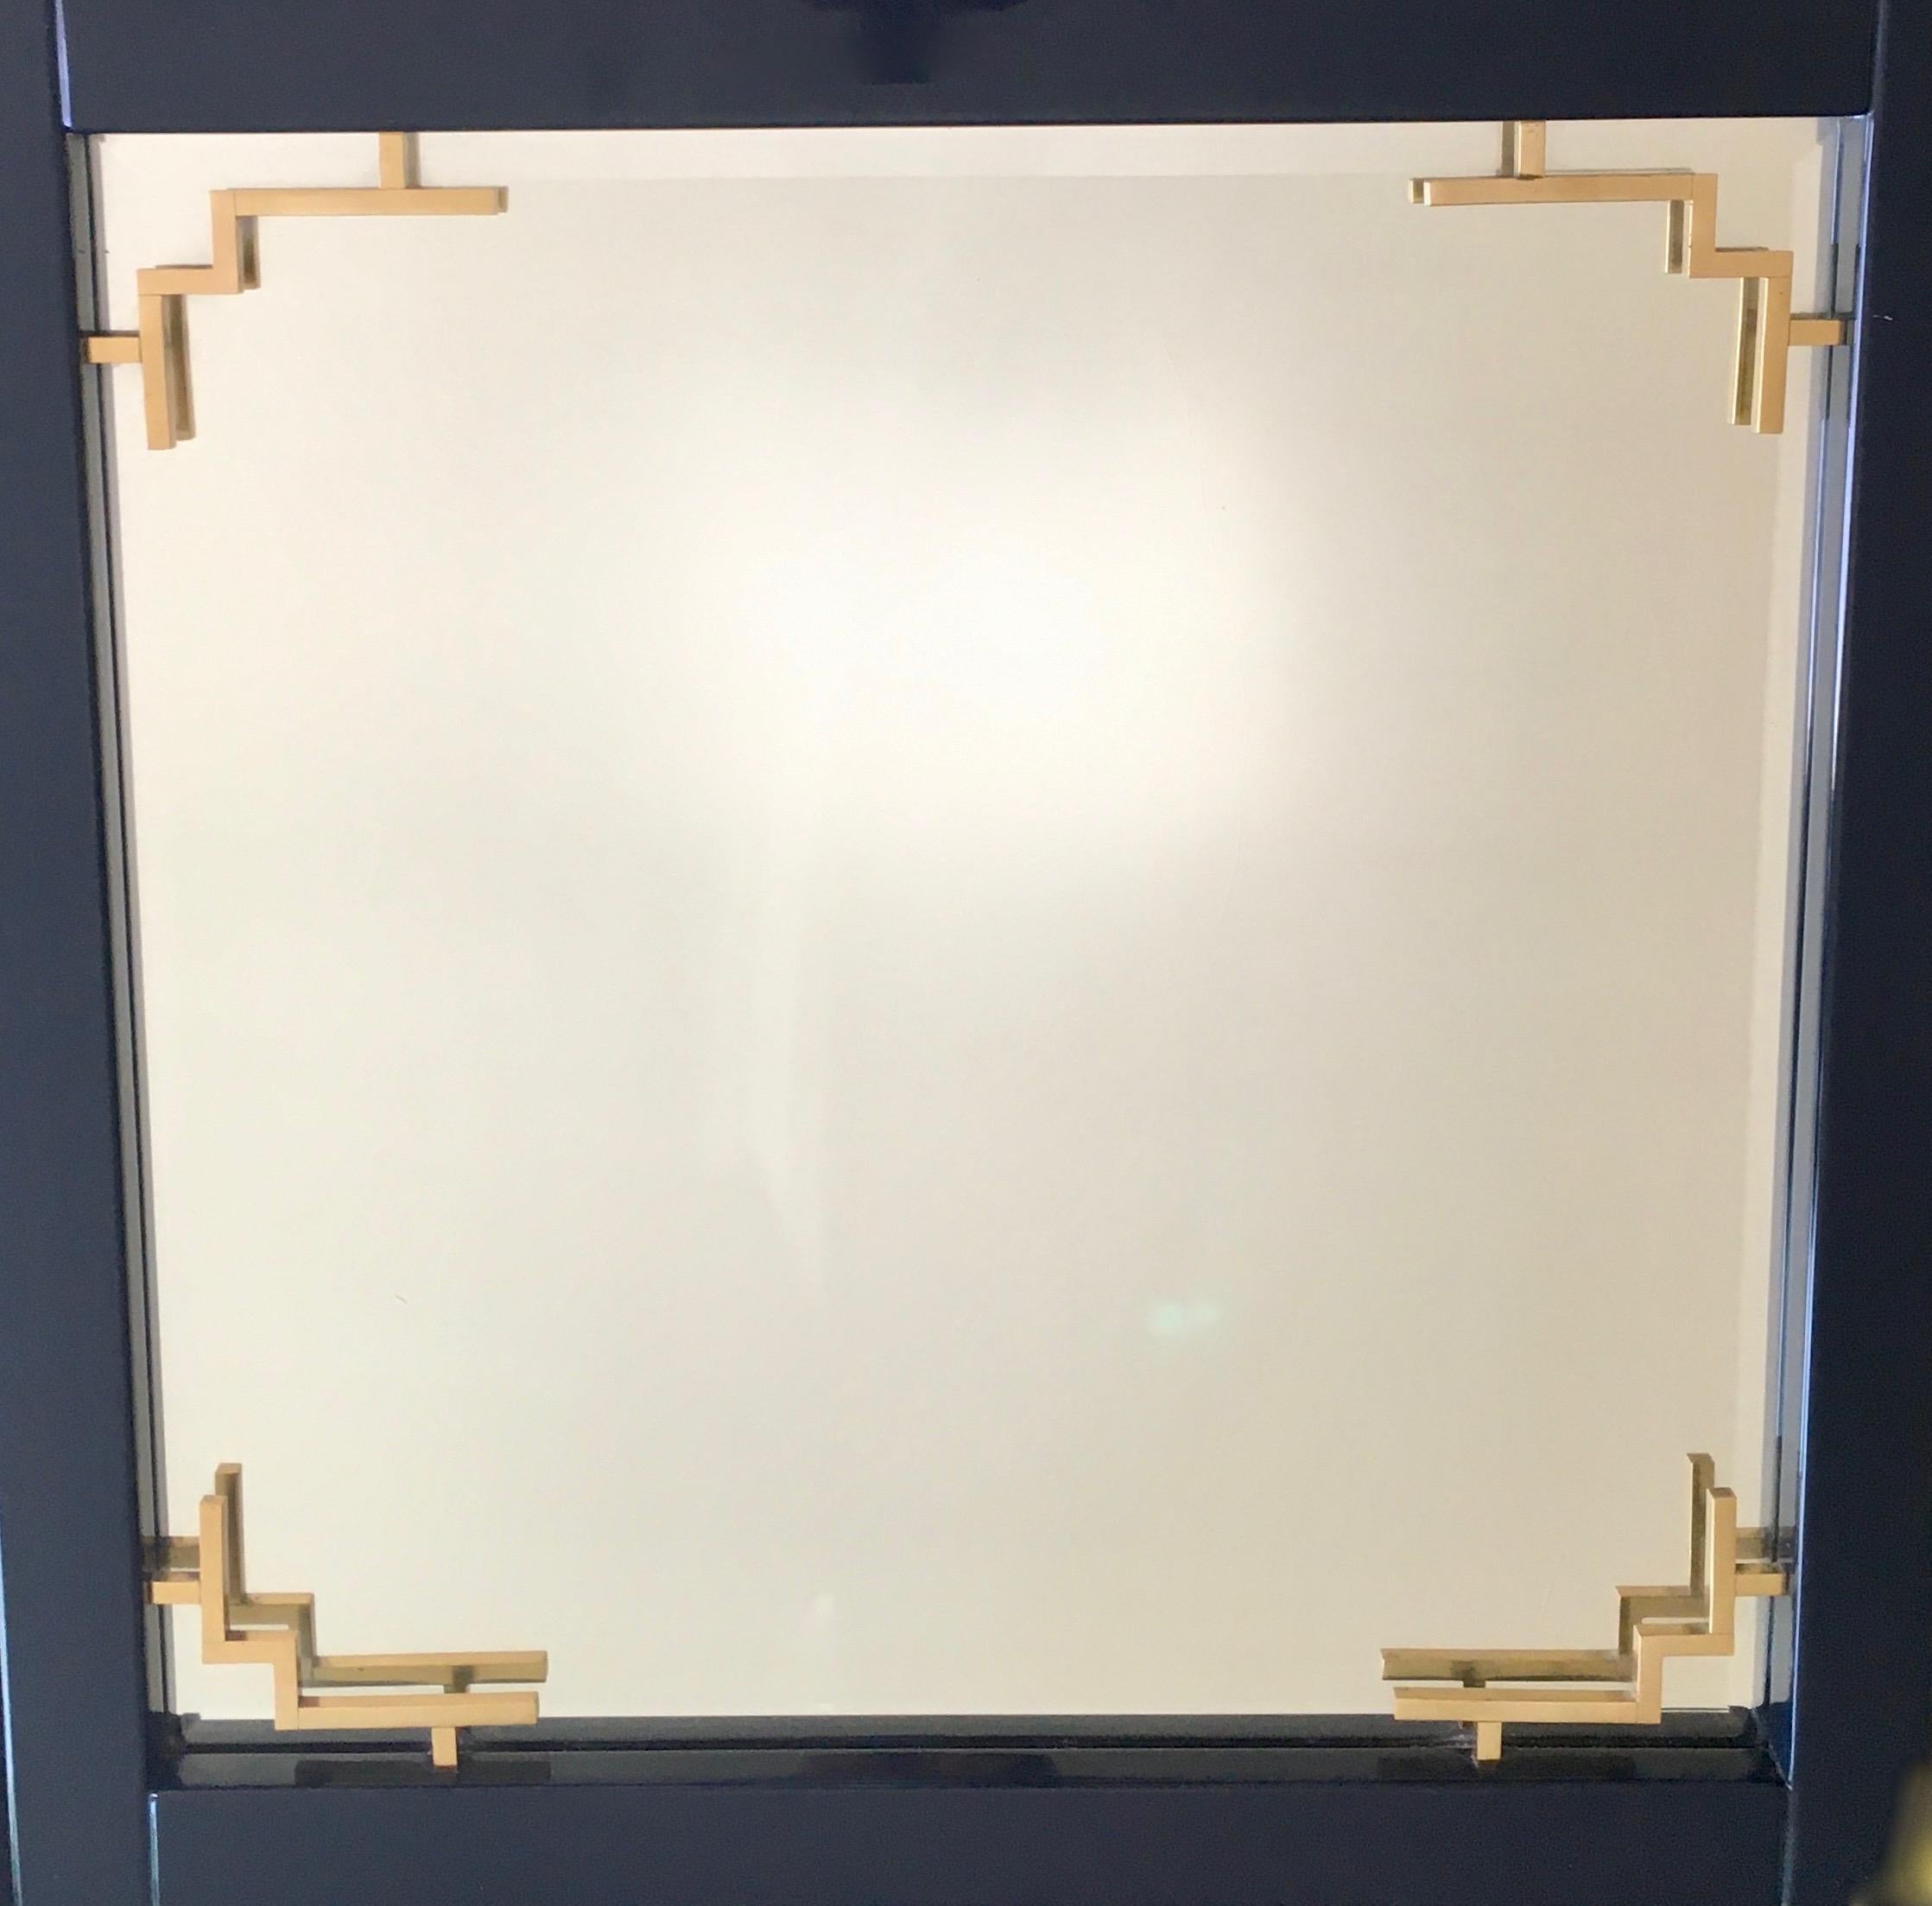 Large square mirror with fine Asian inspirated brass accents.
Deep blue lacquer frame.
By Maison Jansen, 1978.